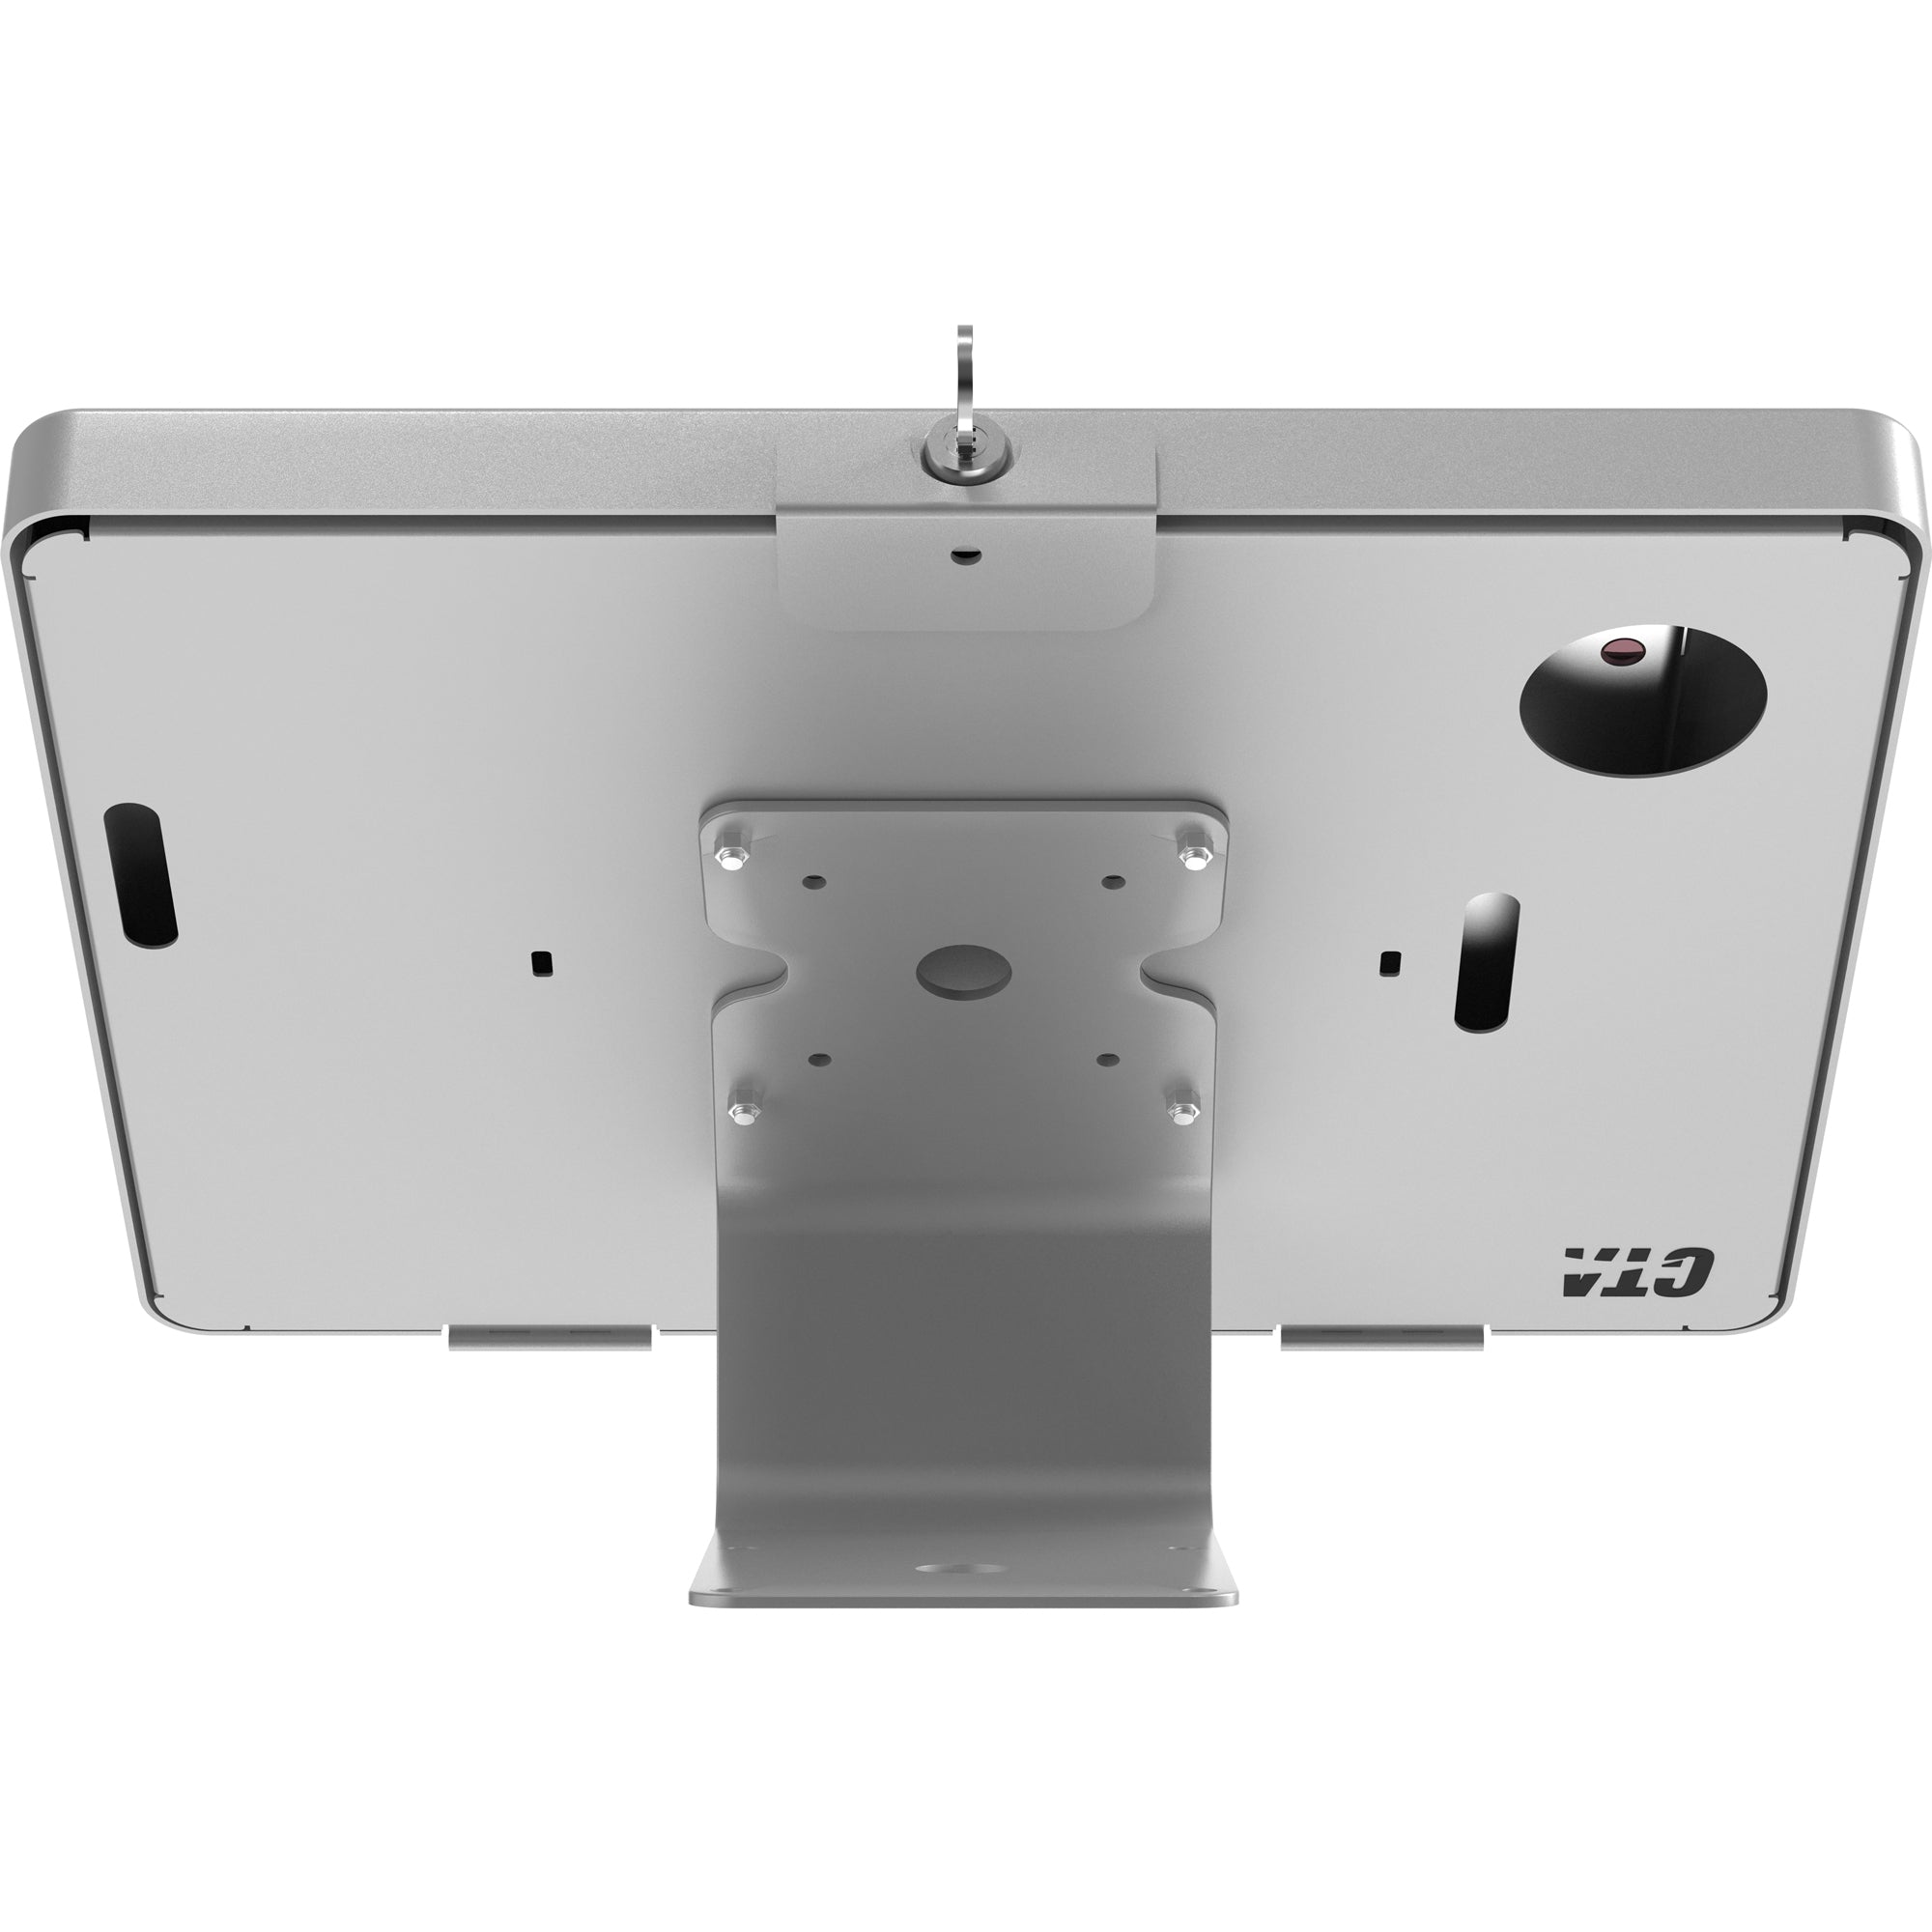 Curved Stand & Wall Mount With Paragon Enclosures